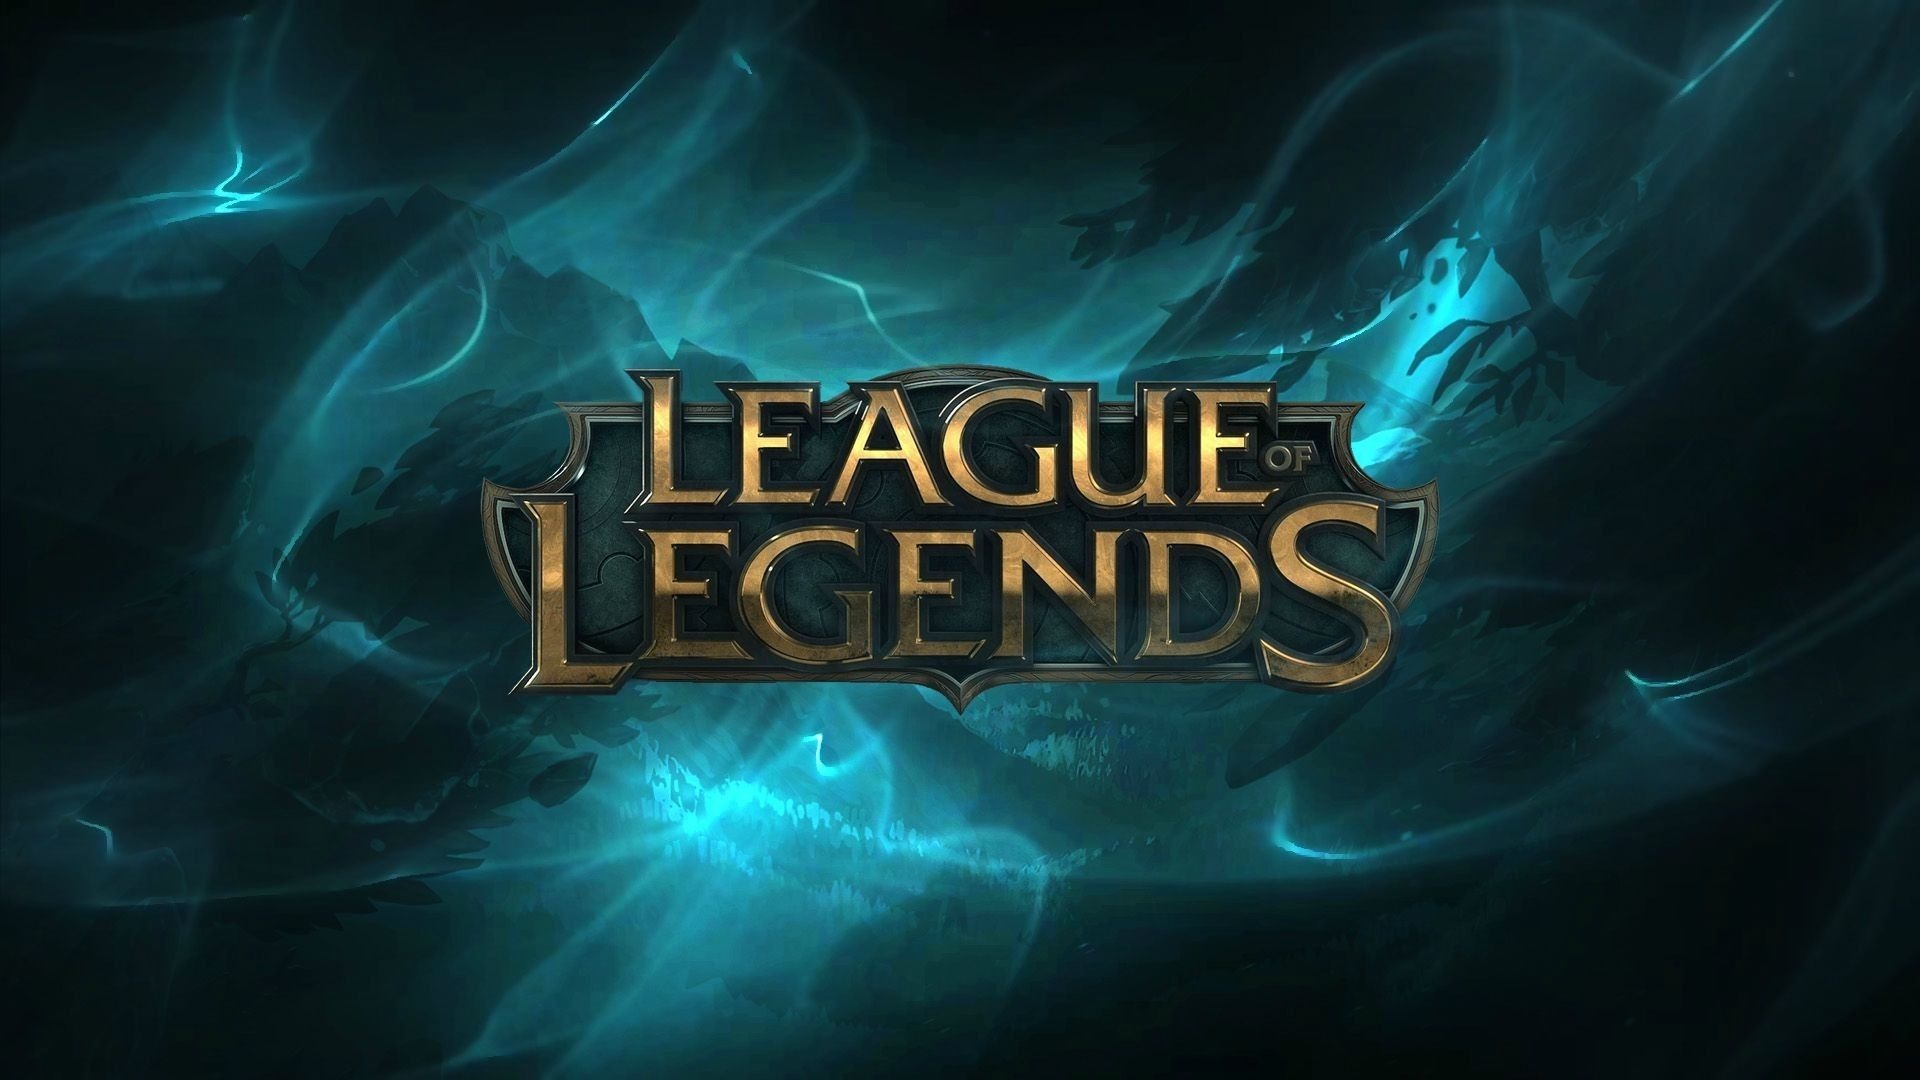 League of legends written on its game poster